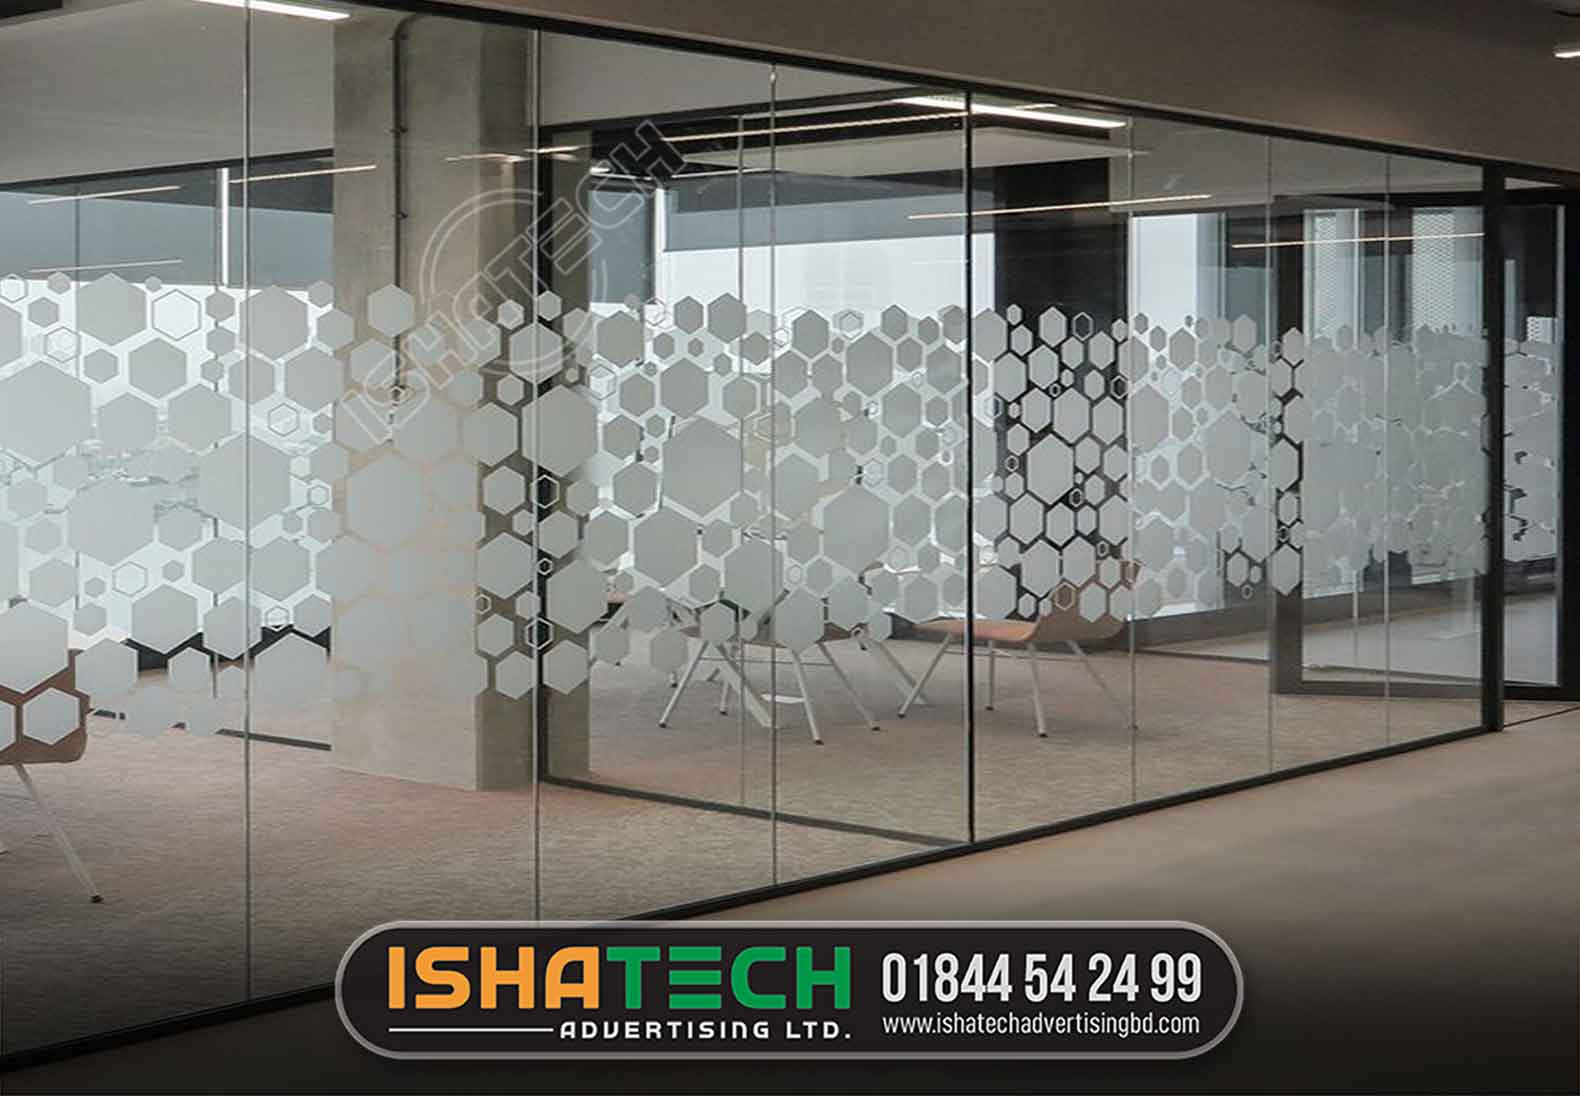 Bangladeshi prices for Office Glass Clear Frosted Sticker Print & Pasting. frosted window glass Glass film with a frosted design, glass wallpaper, a frosted glass door, a frosted glass pane, and glass stickers for an office nearby placement of frosted glass stickers The cost of frosted glass stickers in Bangladesh glass frosted paper price in Bangladesh, glass sticker, and office glass frosted paper.